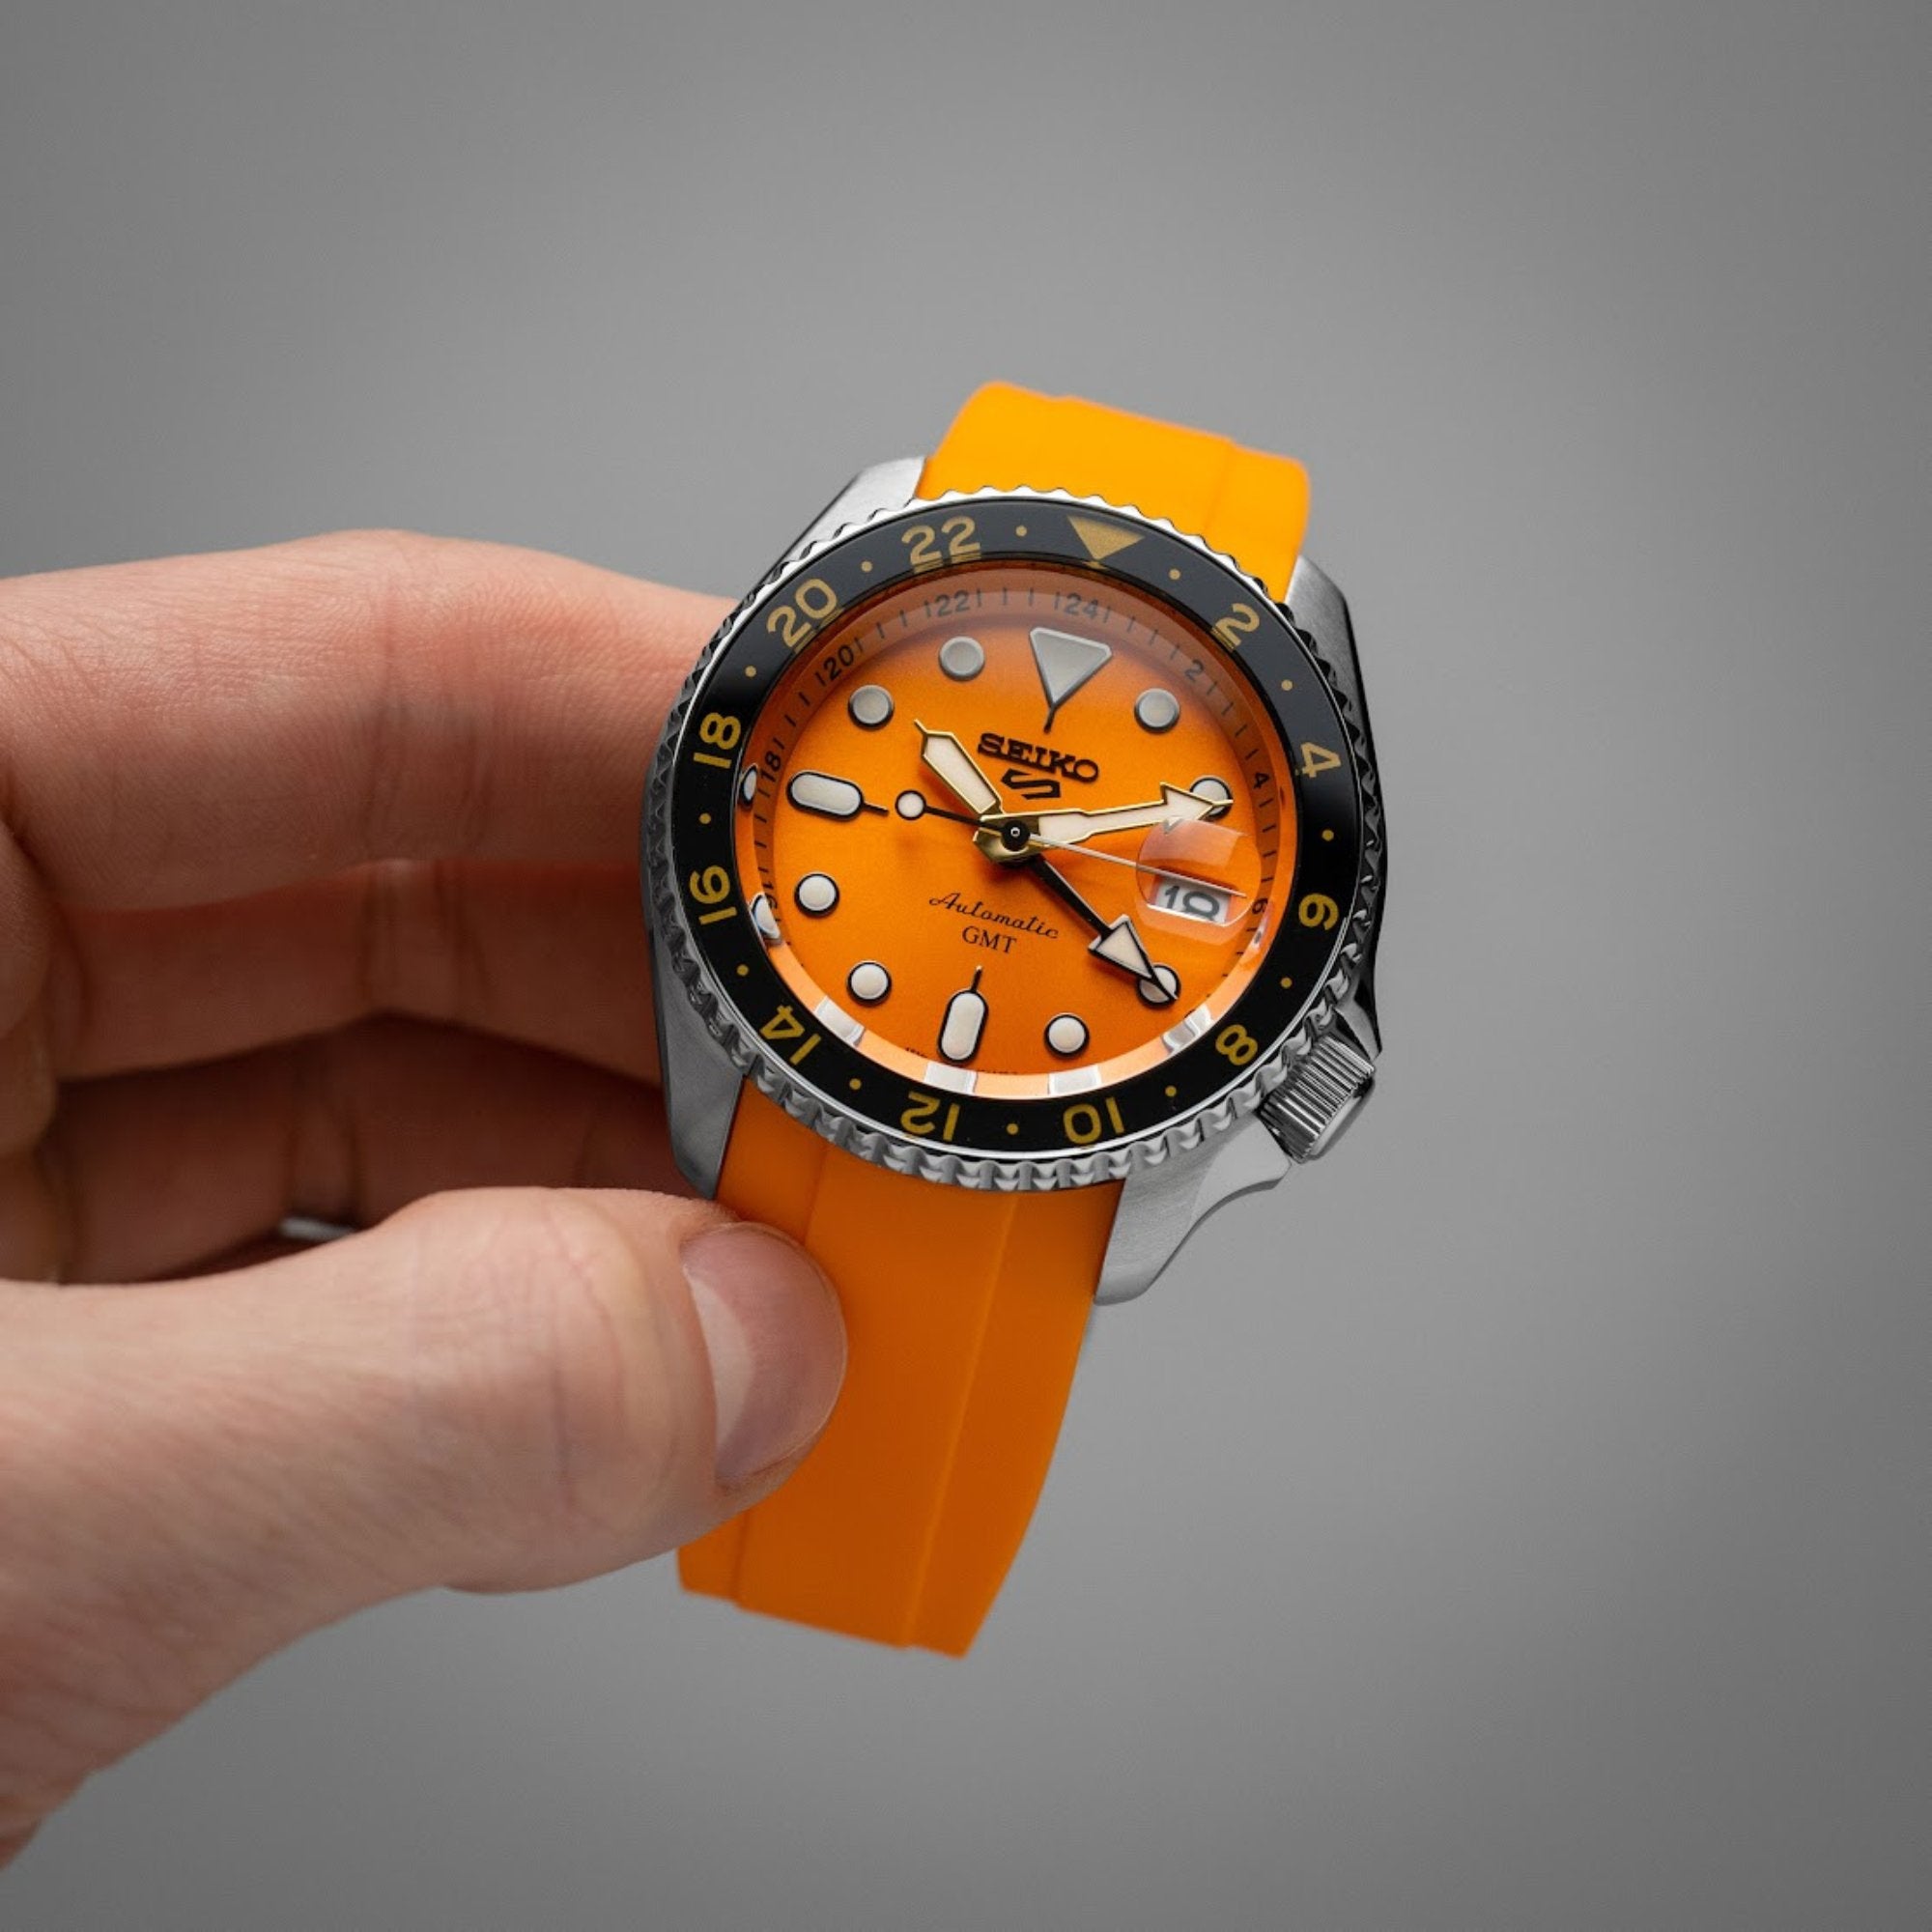 Curved End Soft Silicone Strap - Compatible with Seiko SPRK – Orange (2418) -StrapSeeker